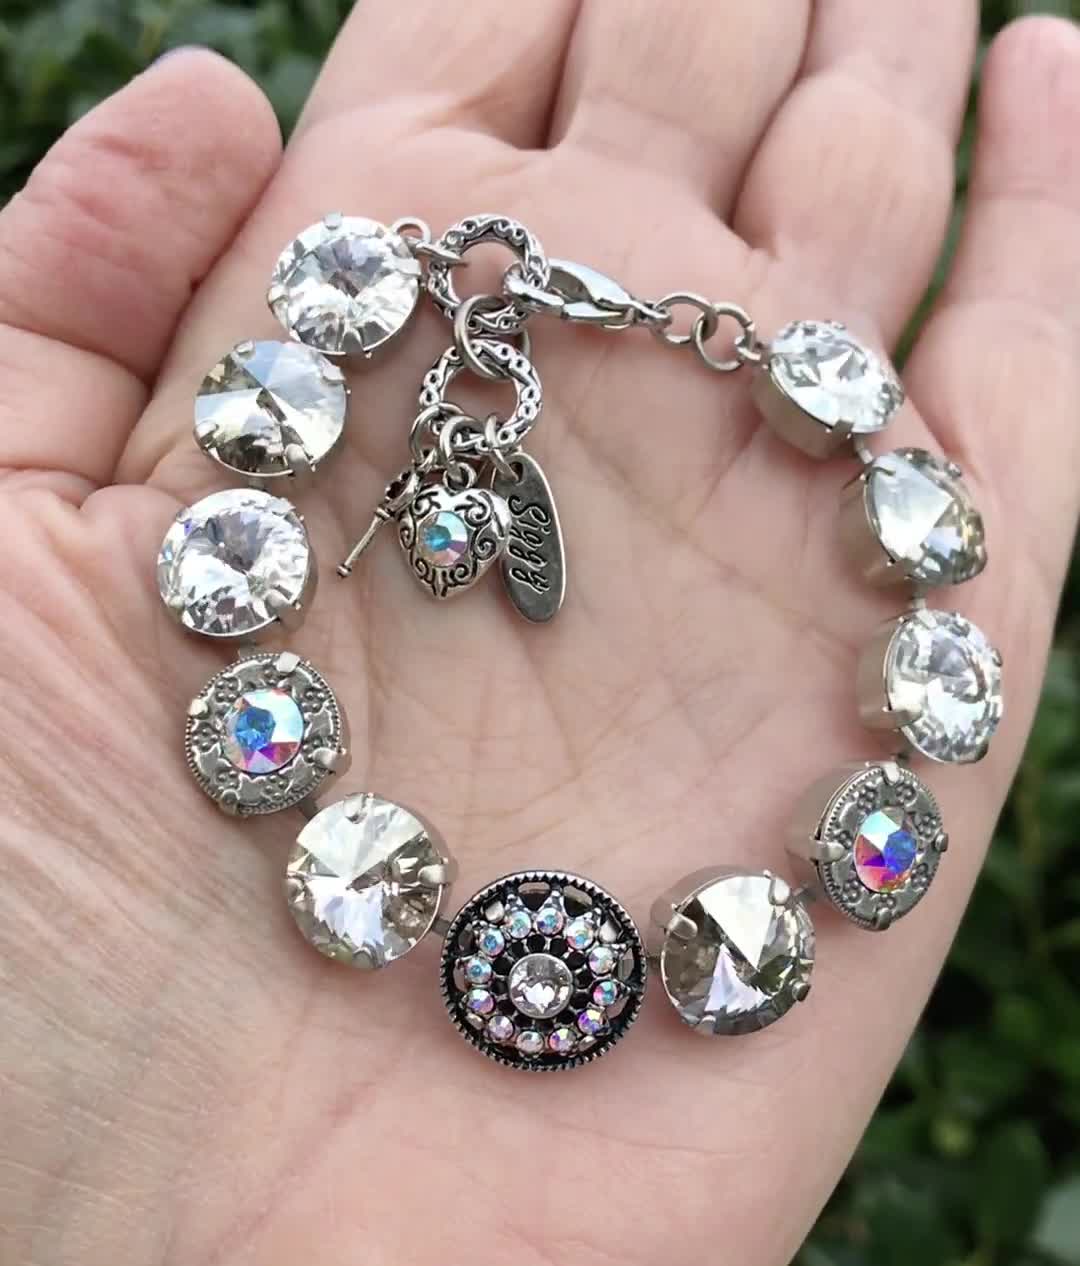 Crystal N Ice Bracelet made with Genuine Austrian 12mm Rivoli Crystals,  Flower Embellished, Clear, AB and Silver Tones, Assorted Finishes